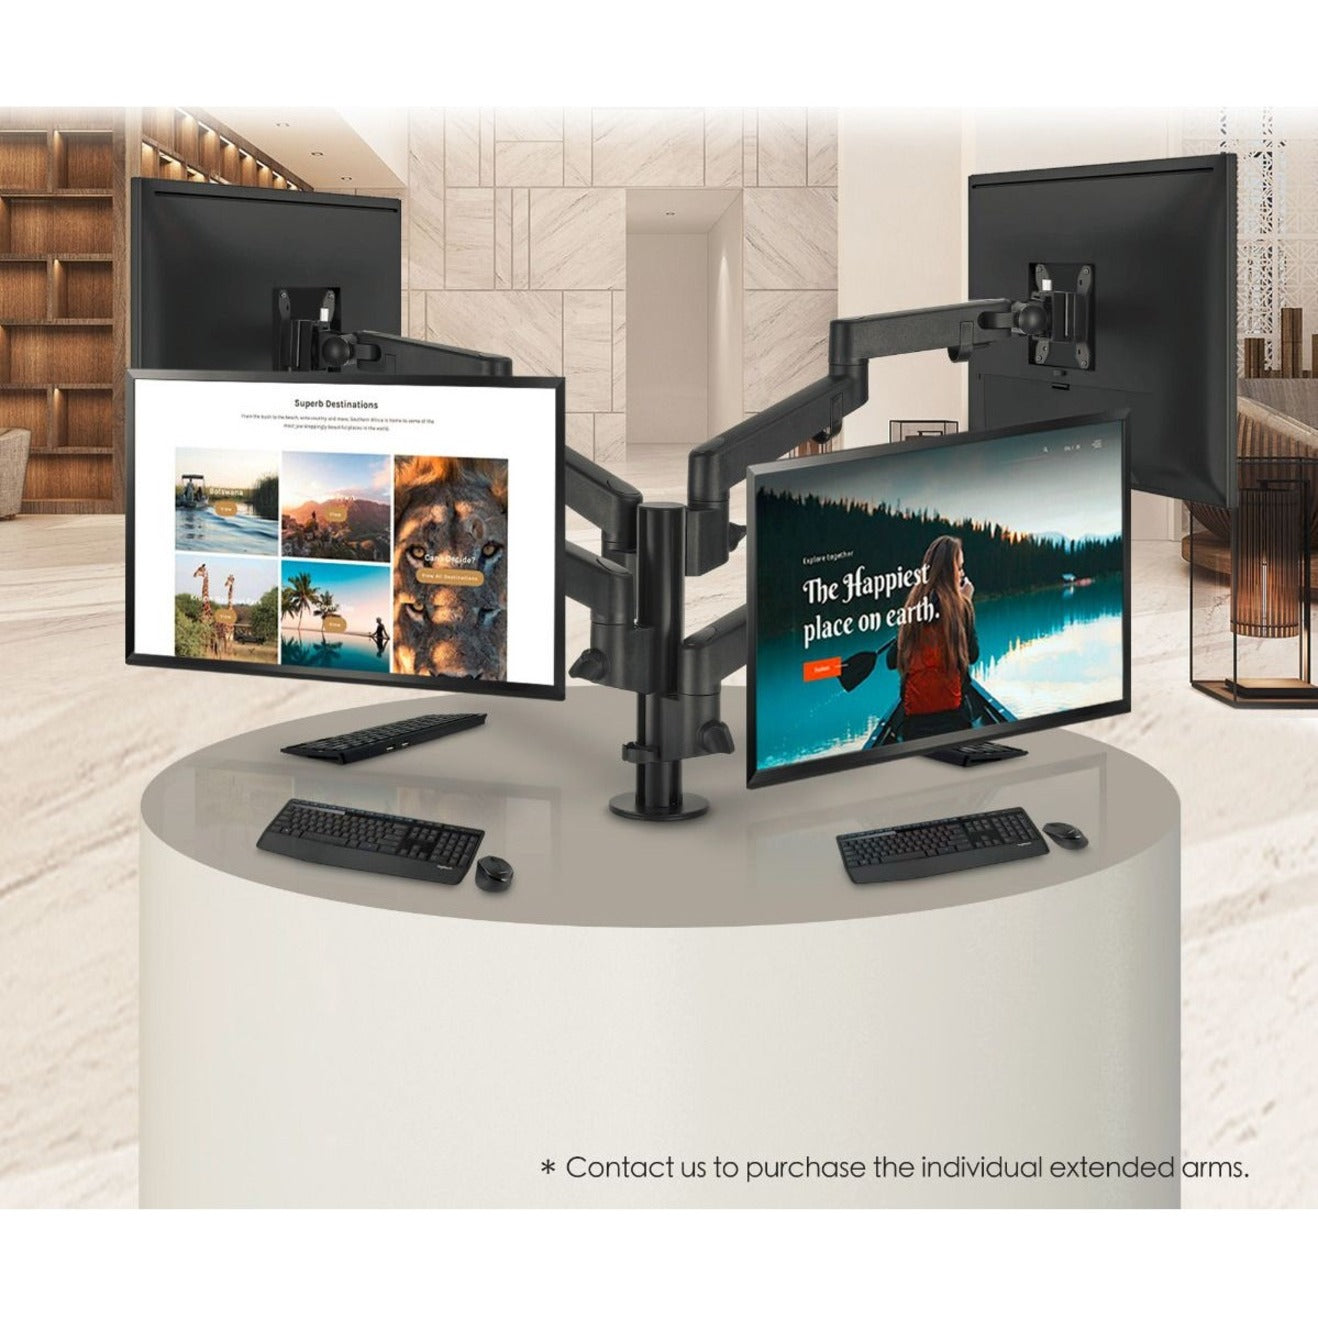 SIIG CE-MT3D11-S1 Single Pole Multi-Angle Articulating Arm Single Monitor Desk Mount, Multiple Viewing Angles, Tilt, Swivel, Sturdy